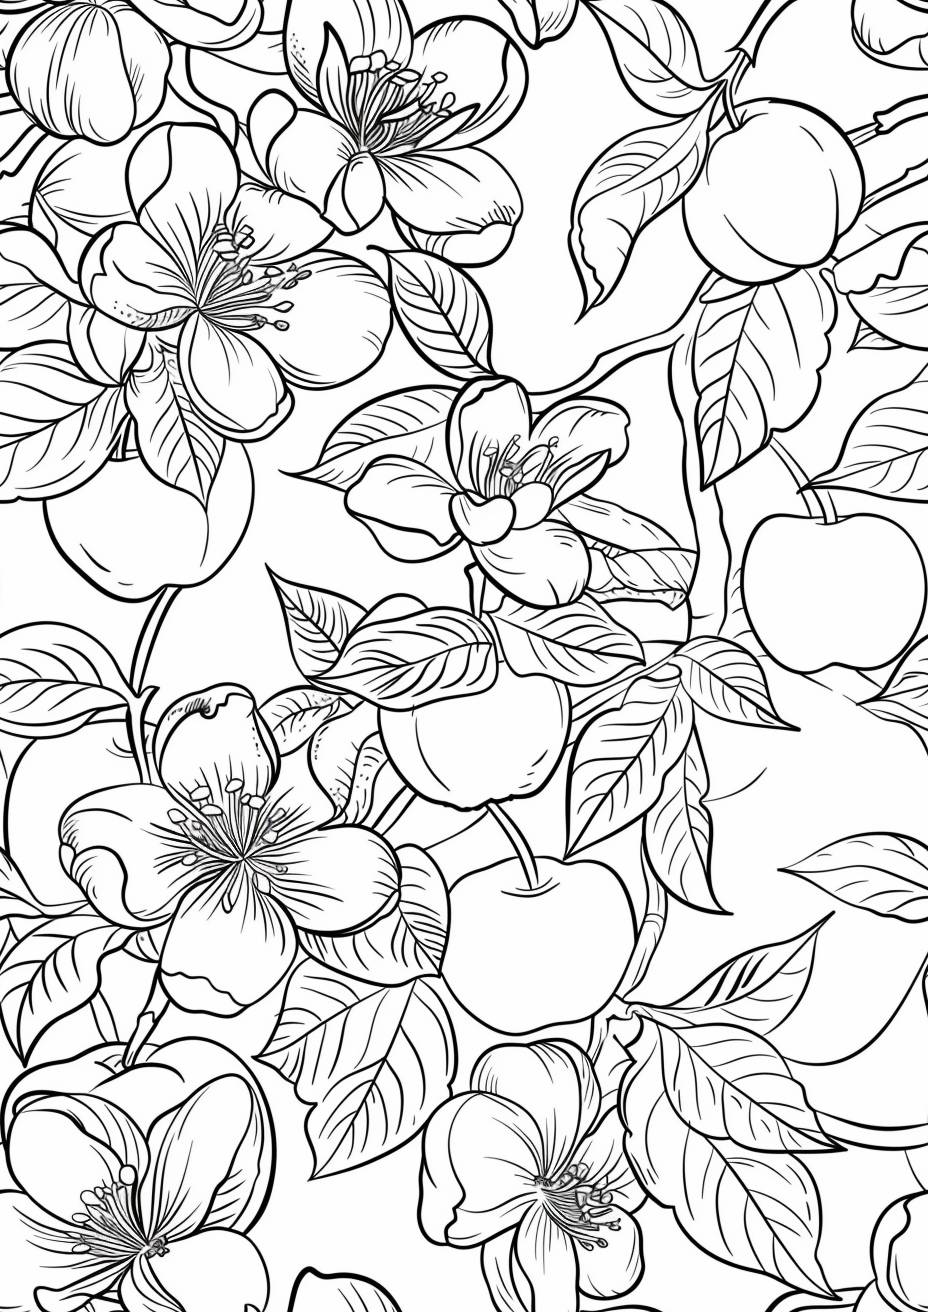 Coloring book page, white apple flowers and beautiful green apples